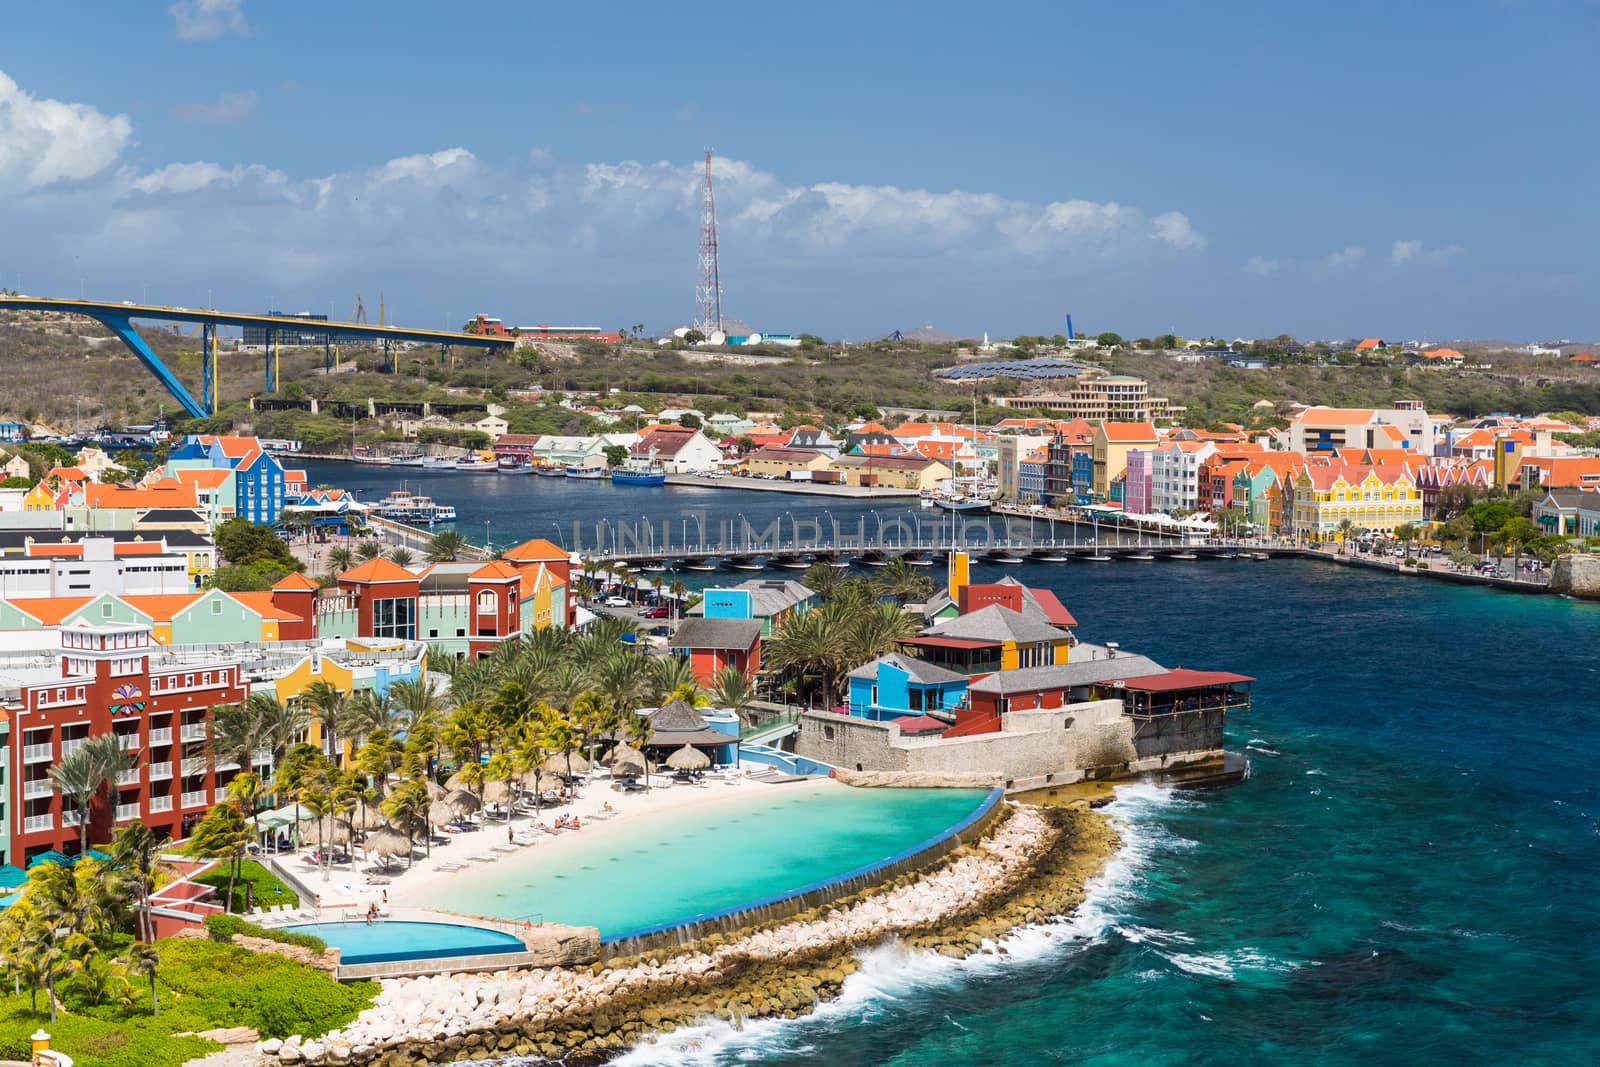 Willemstad in Curacao and the Queen Emma Bridge by chrisukphoto